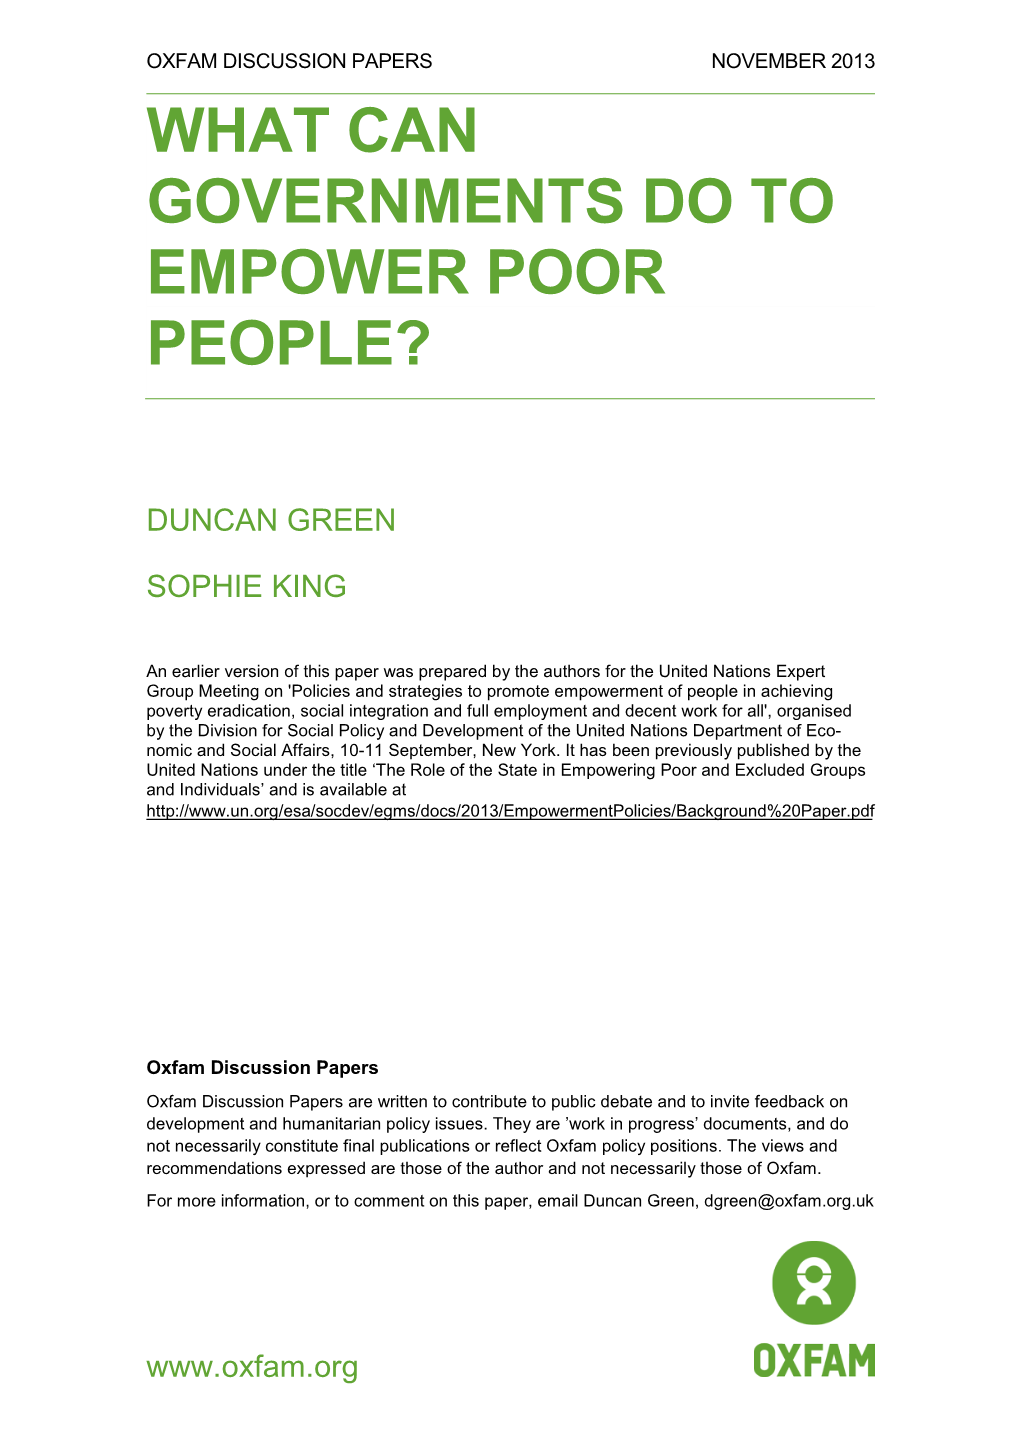 What Can Governments Do to Empower Poor People?